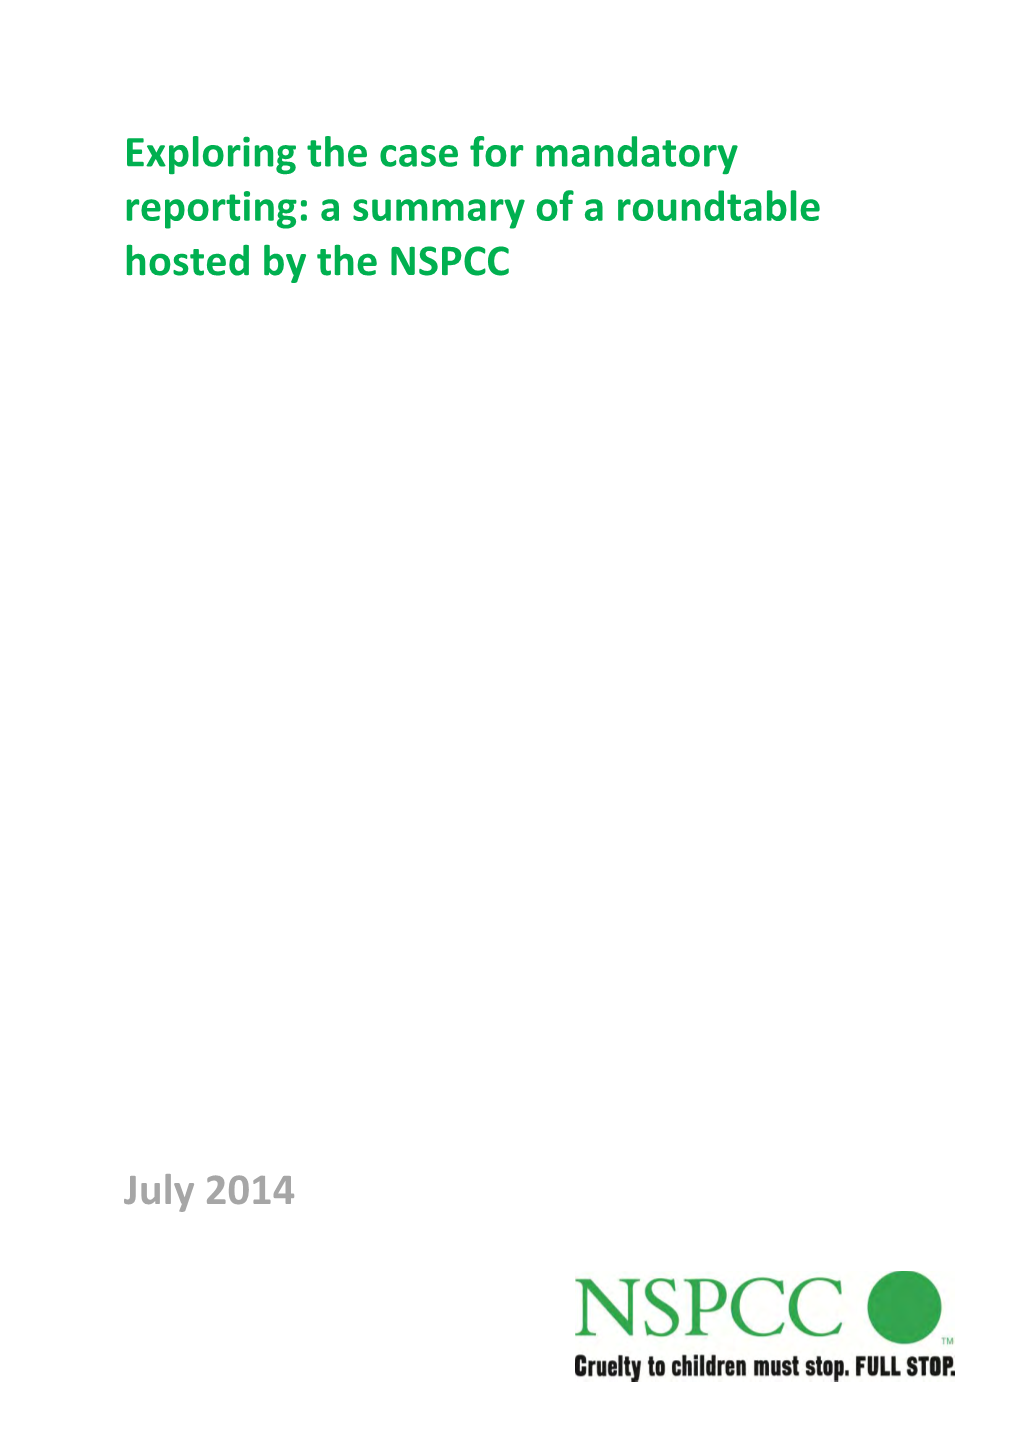 Exploring the Case for Mandatory Reporting: a Summary of a Roundtable Hosted by the NSPCC